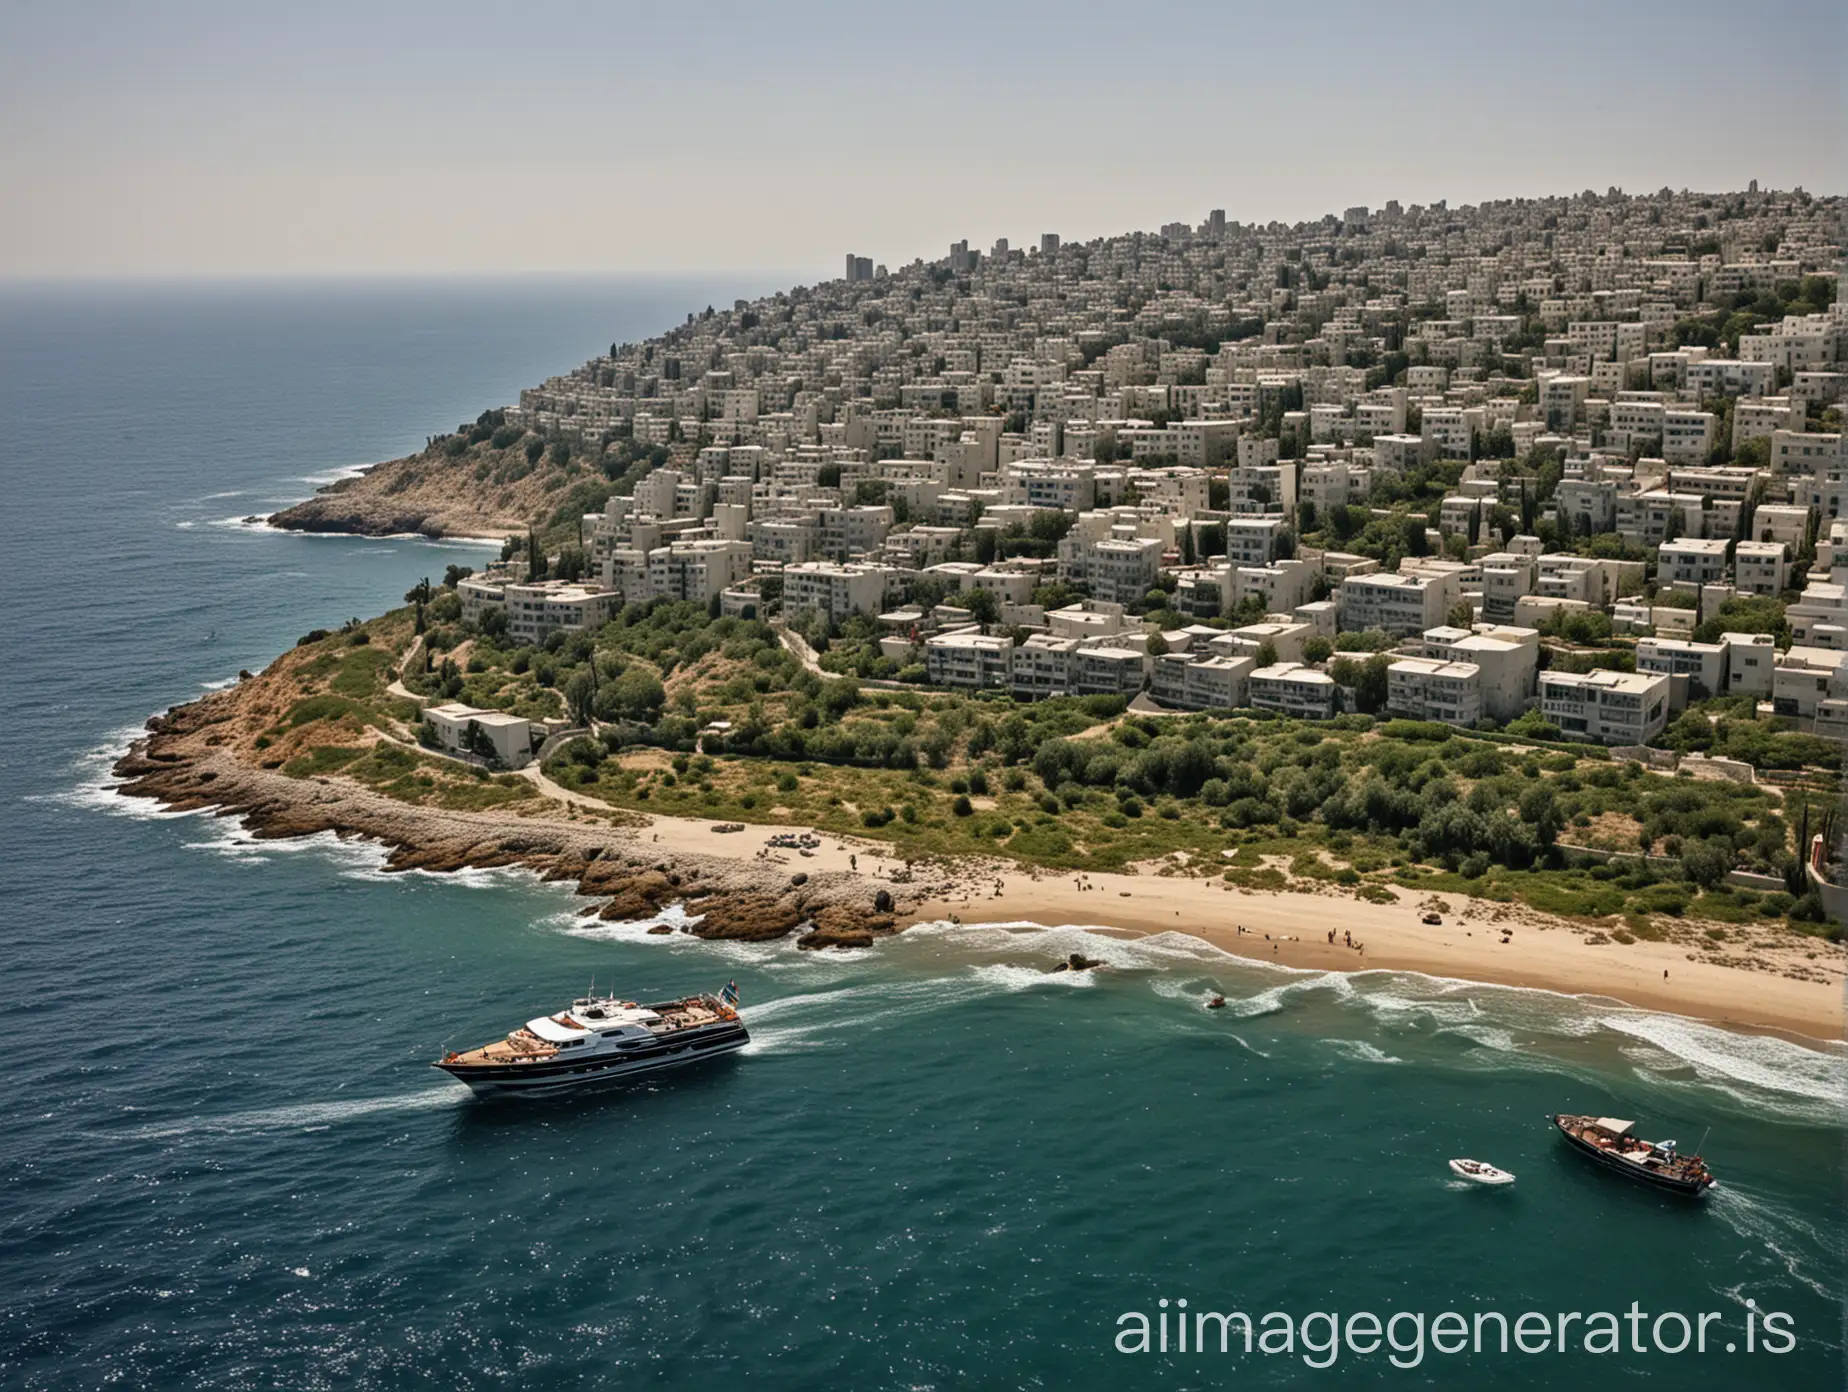 Make the country of Palestine live independently and become a developed country in the world and be overgrown with vast greenery and there are yachts in the sea that are so vast.